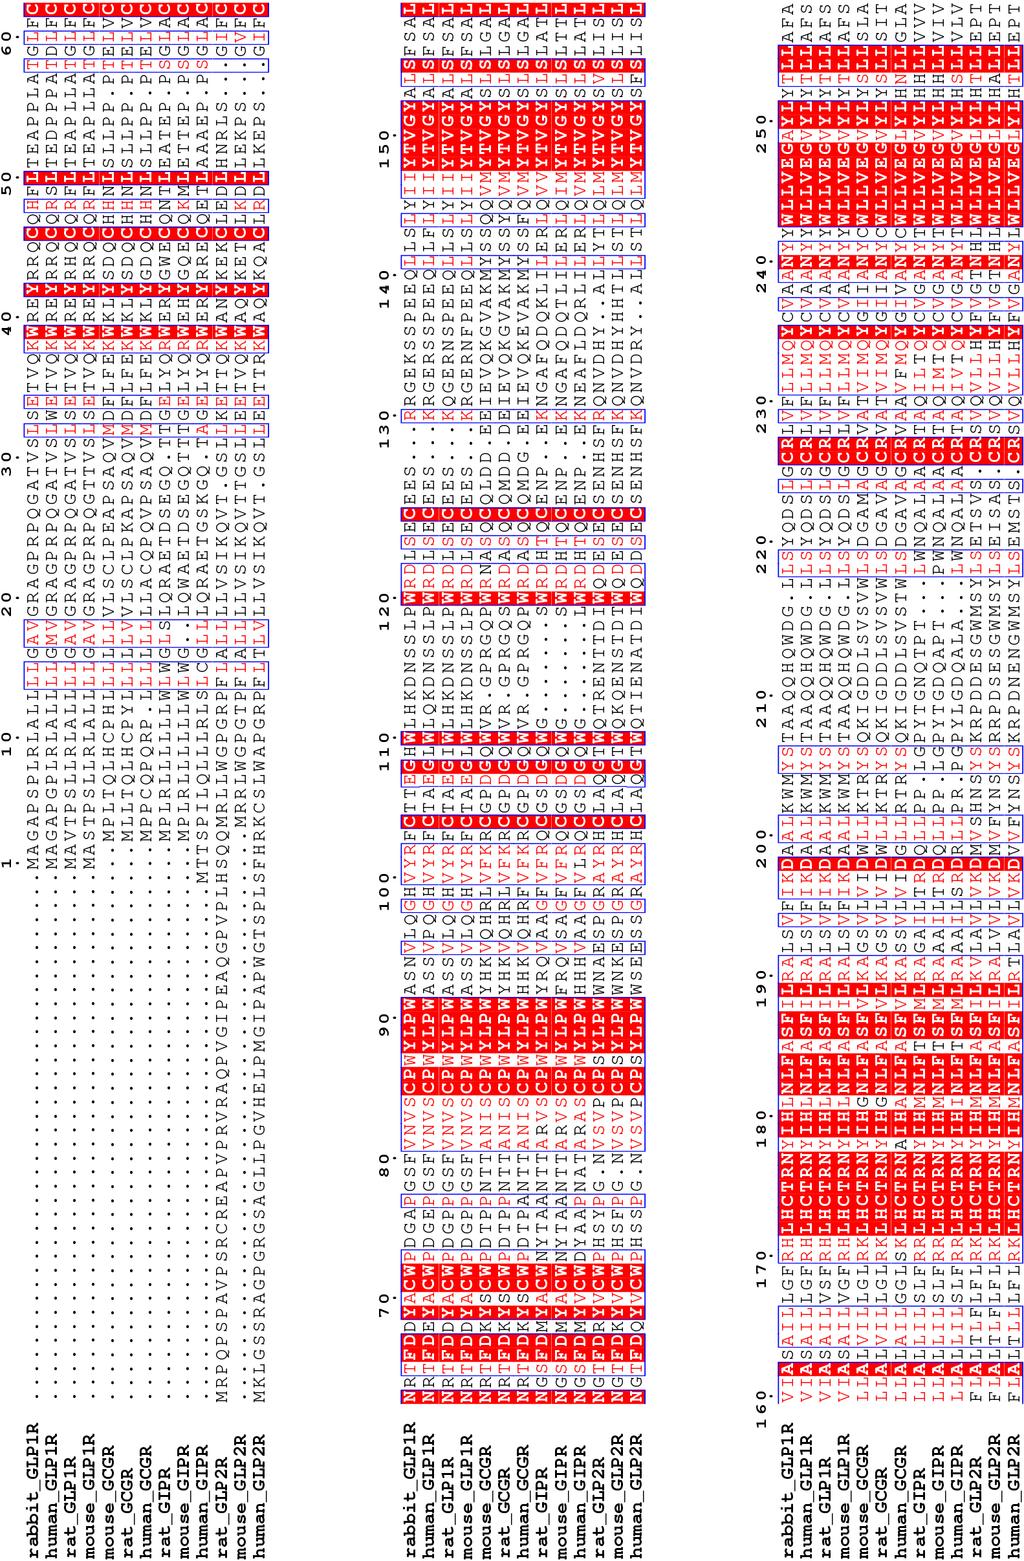 Supplemental Figure 1 Sequence alignment of GCGR subfamily GPCRs.